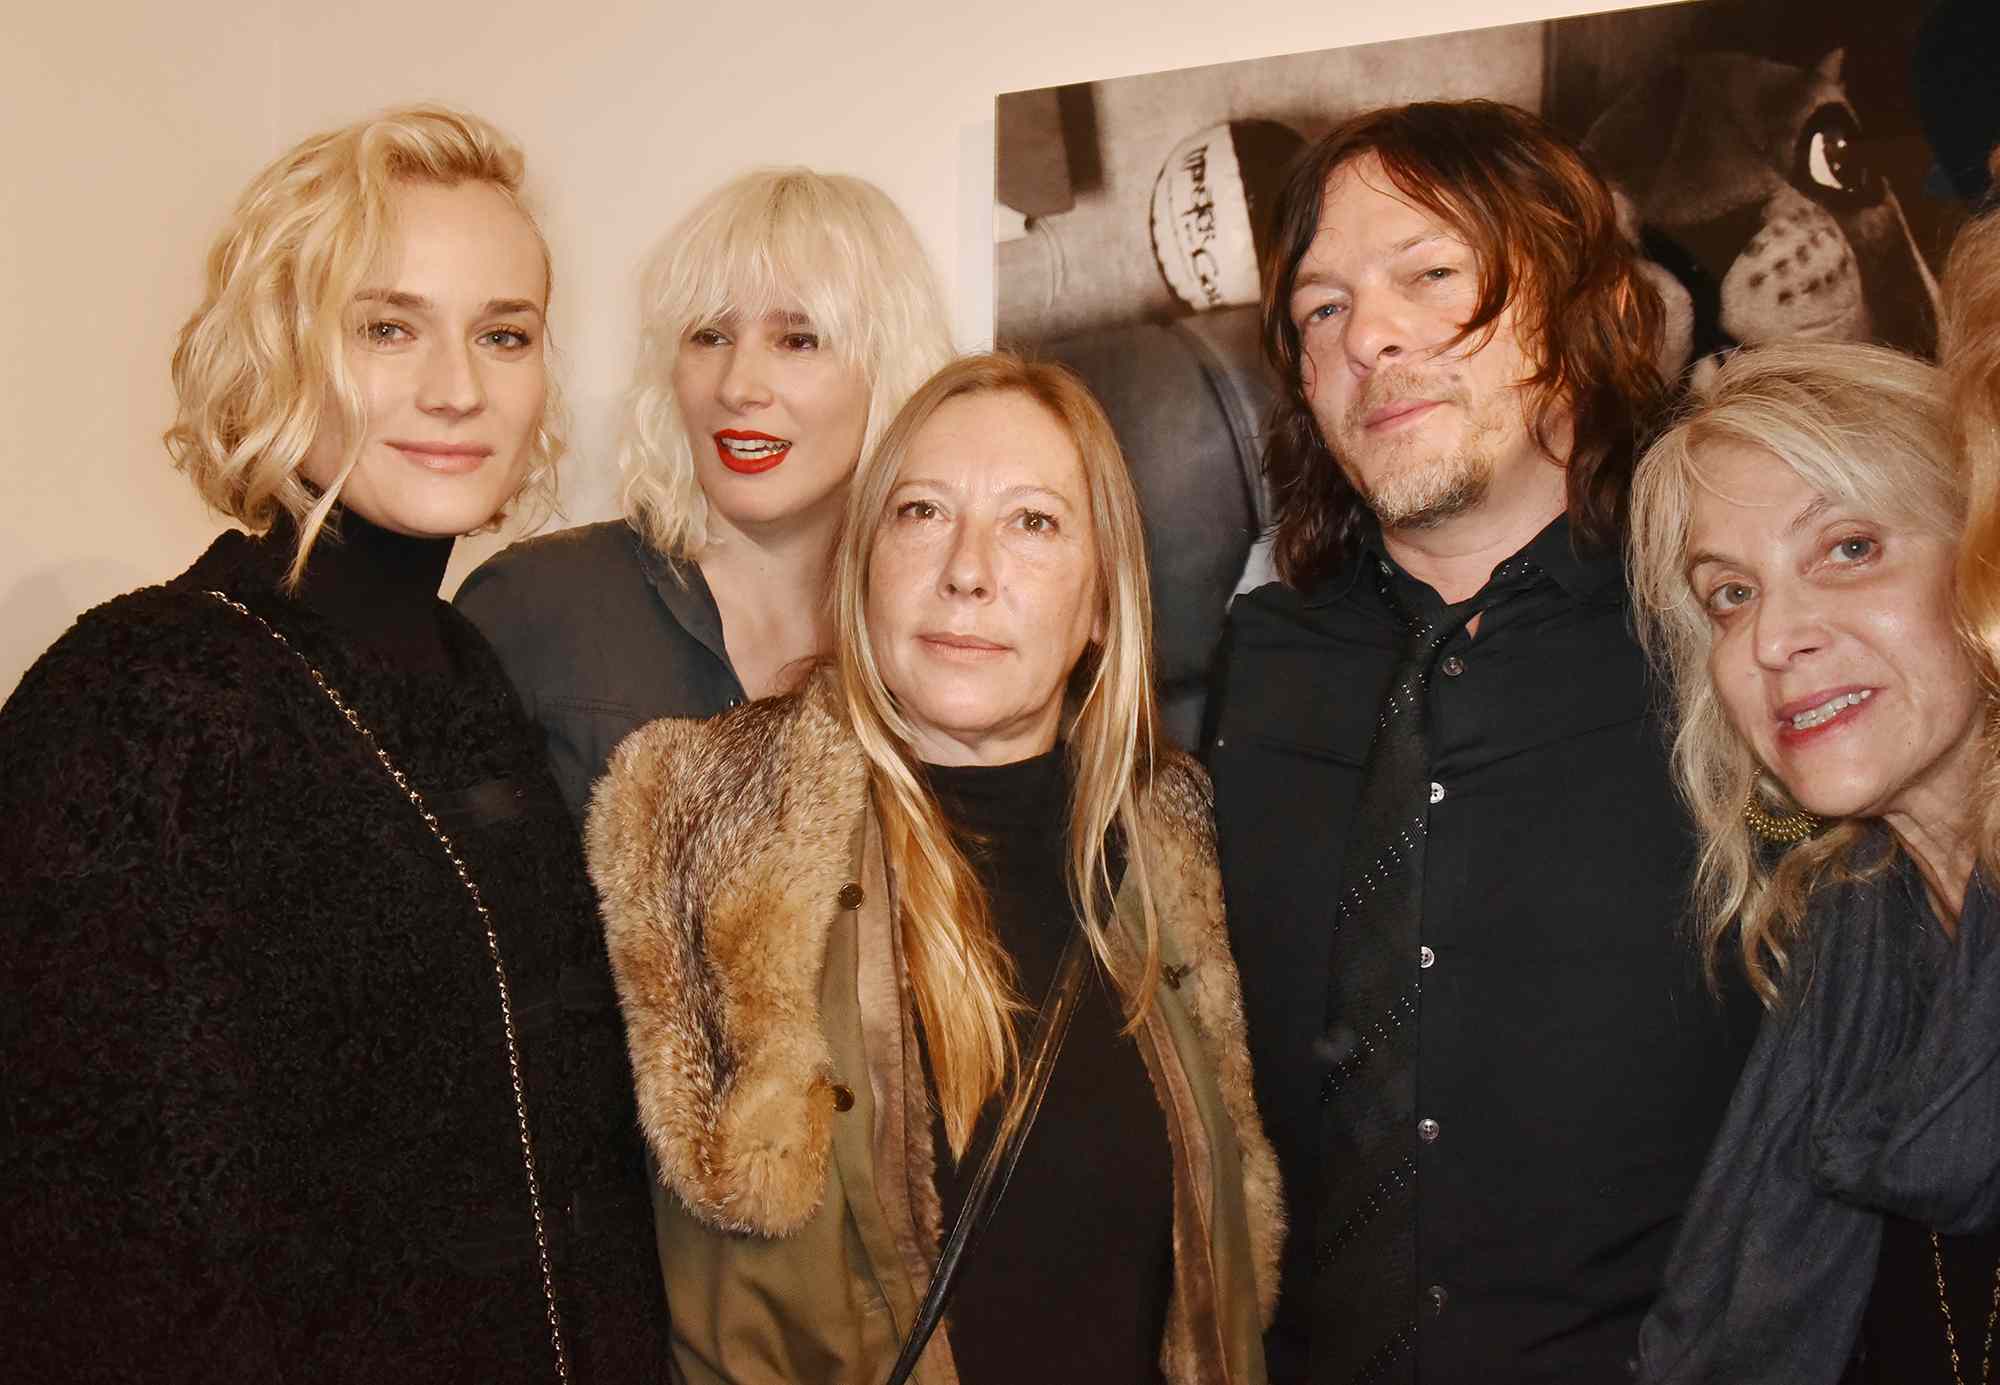 Diane Kruger, a guest, director Fabienne Berthaud, Norman Reedus and curator Laurie Dolphin attend "Norman Reedus" Photo Exhibition around his book "The Sun's Coming Up... Like a Big Bald Head" at Galerie Hors Champs on December 15, 2016 in Paris, France